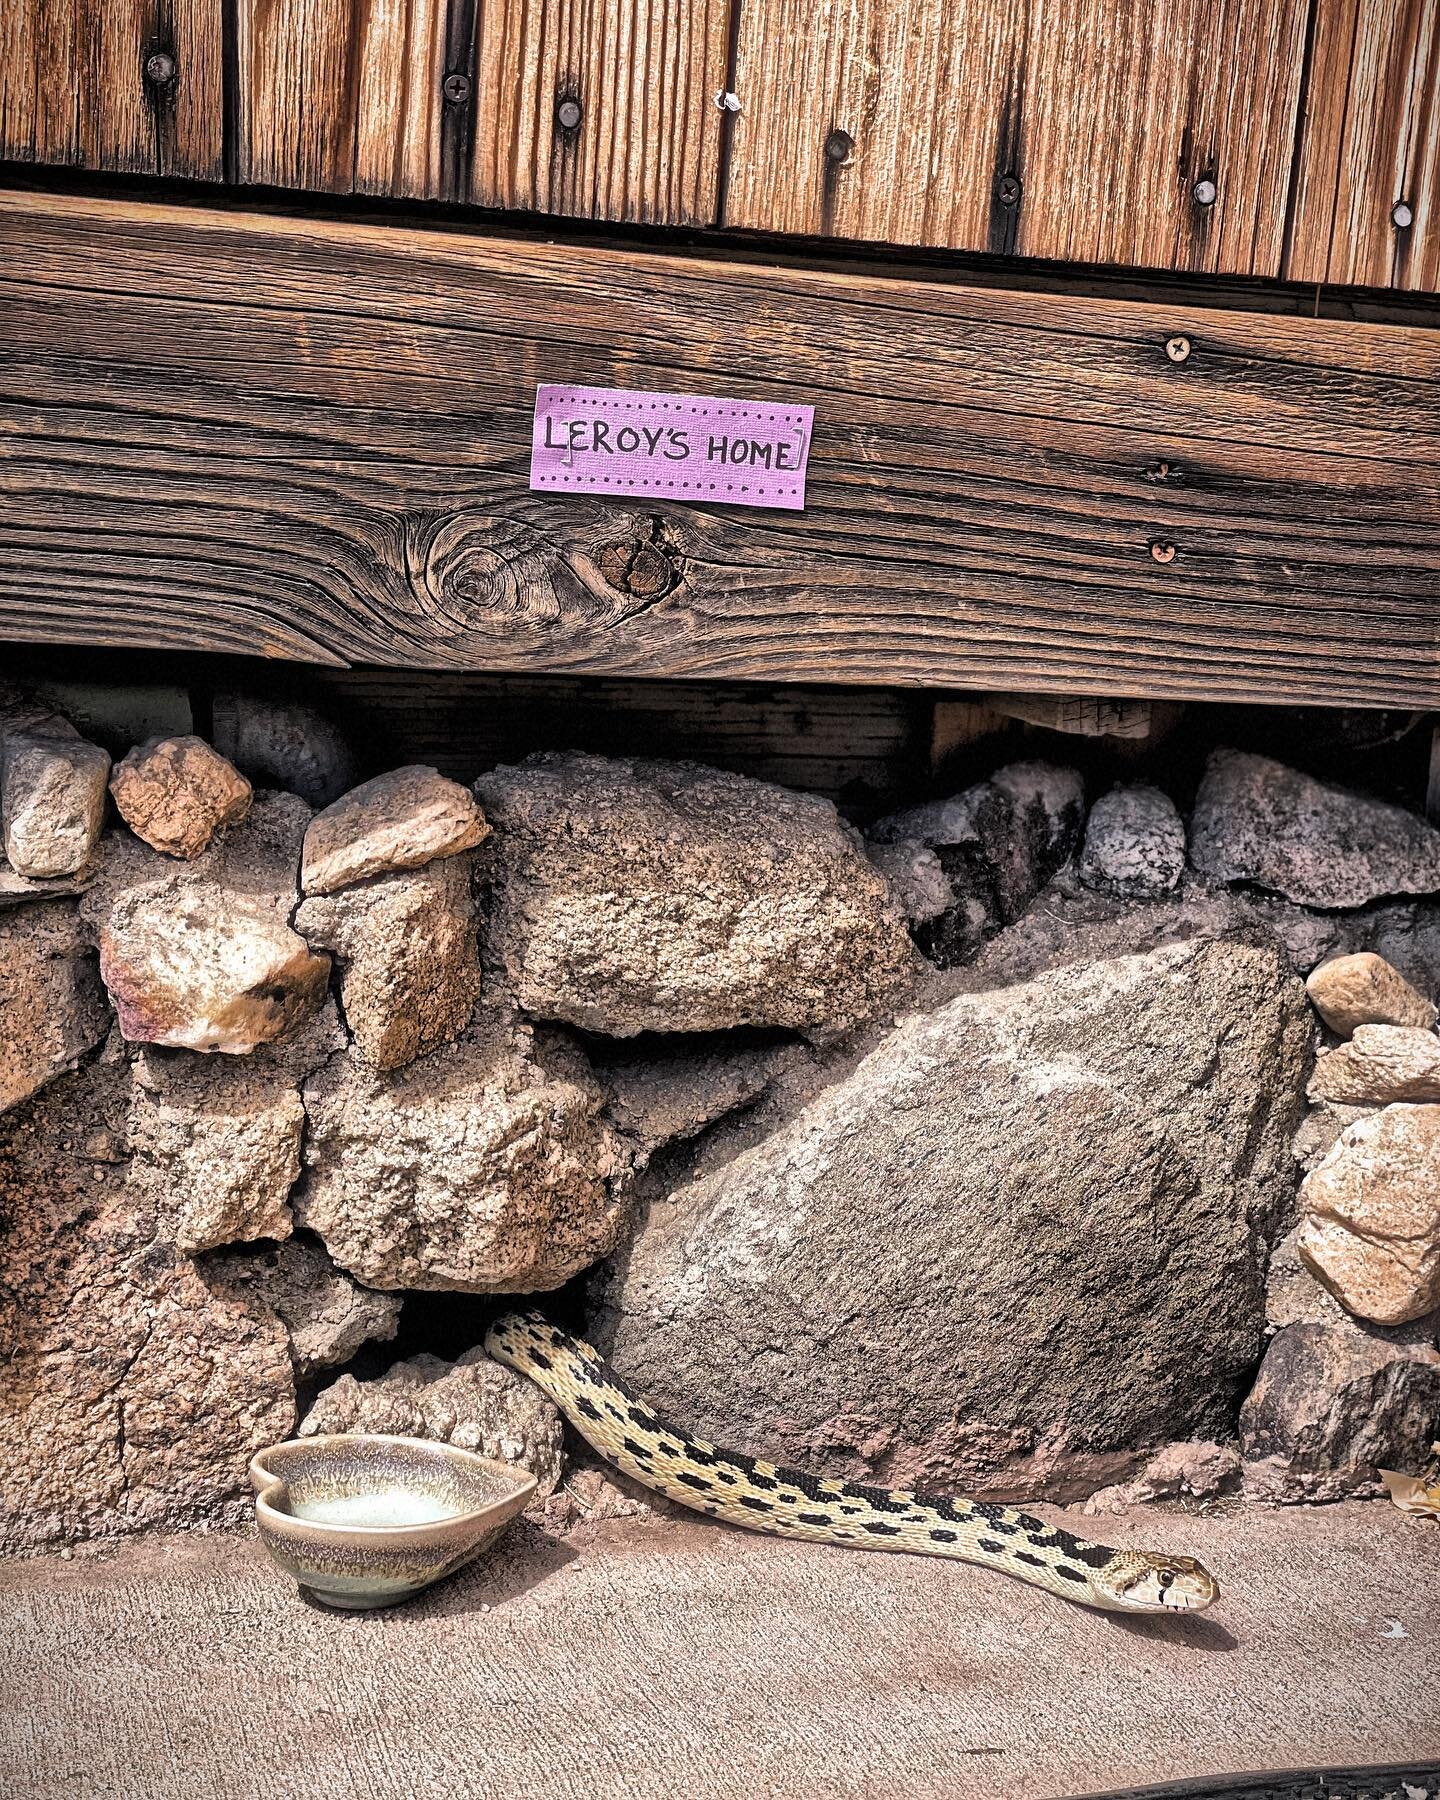 Shop visitors😁🐍🦉🦎 The gopher snake stayed long enough to get a name. There&rsquo;s a really neat video here on our Instagram of the desert iguanas fighting for territory. Check it out! #joshuatree #desert #gophersnake #desertiguanas #barnowl #des